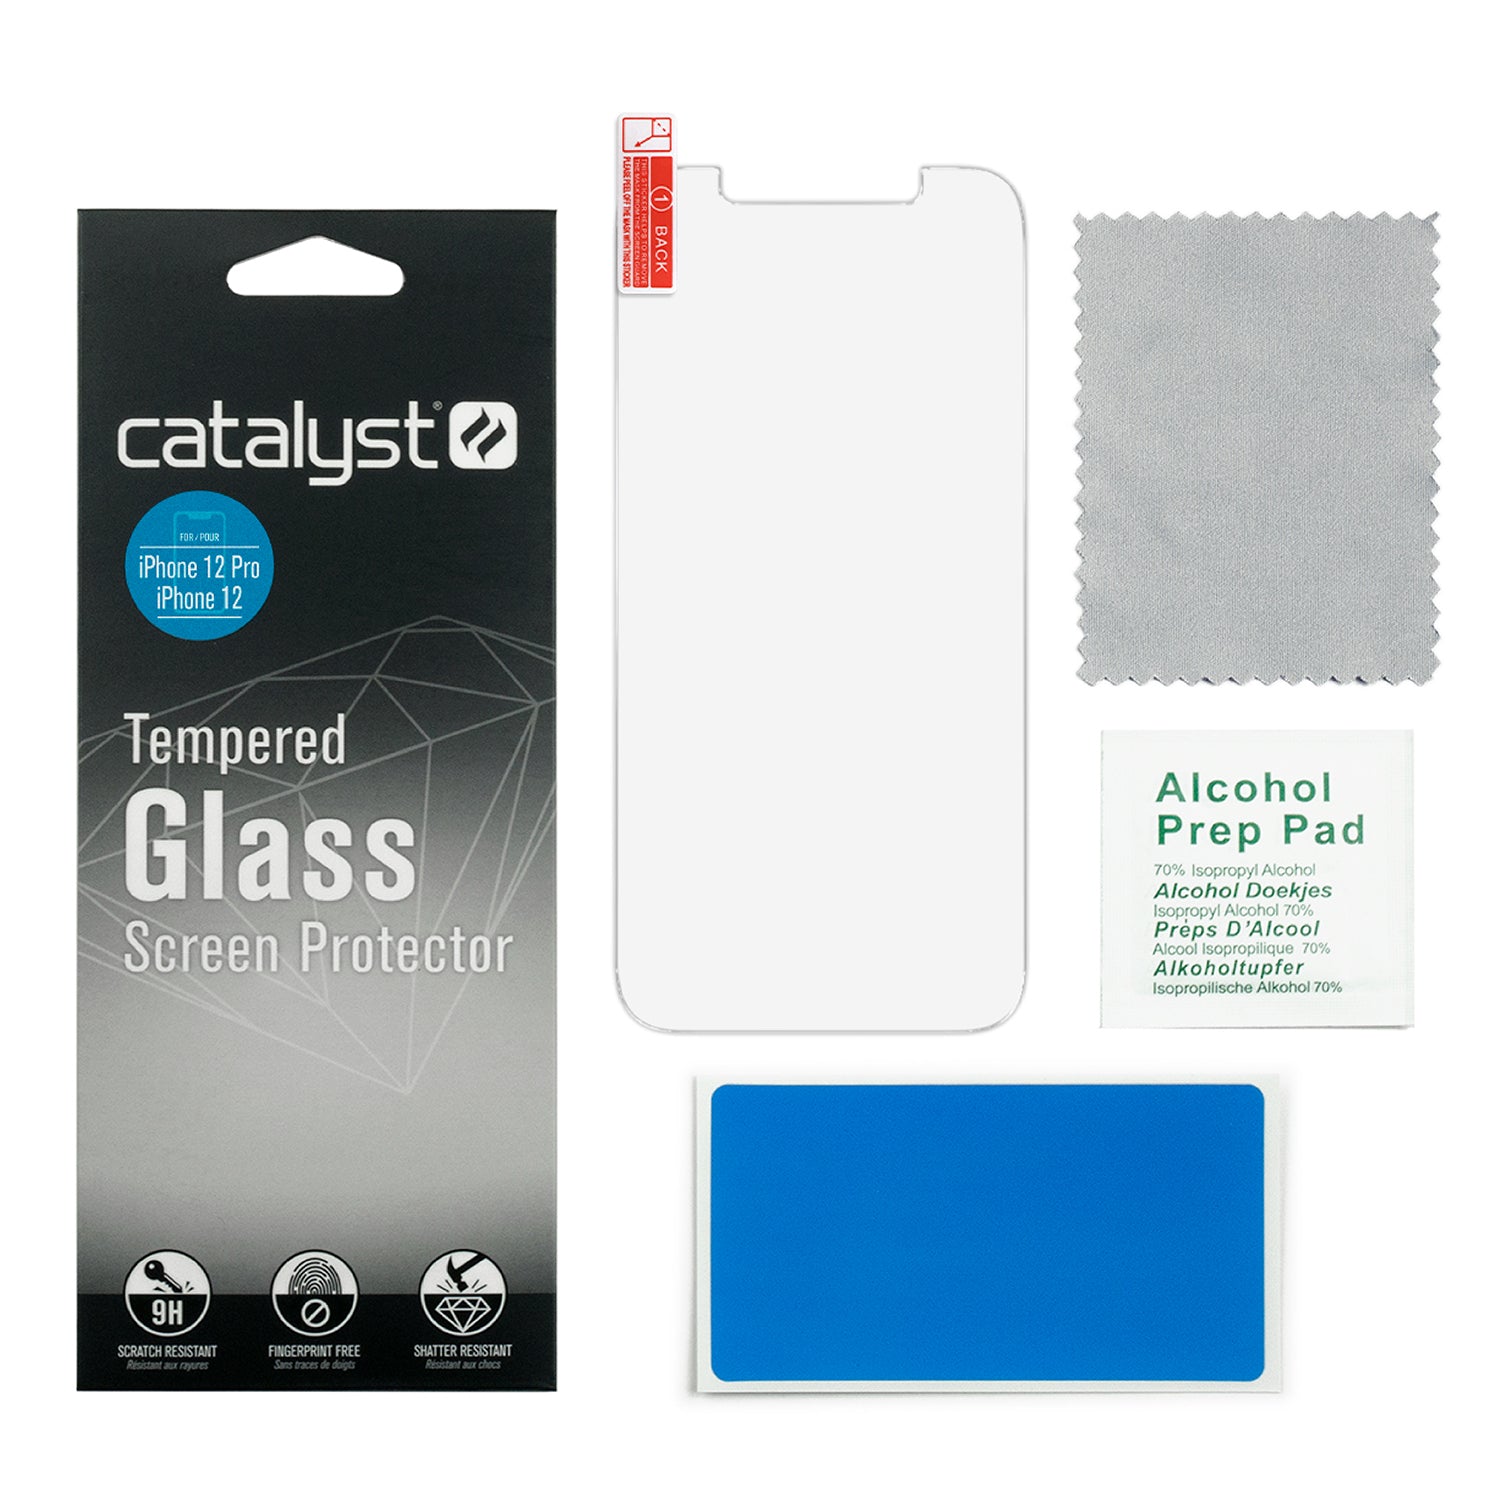 Catalyst Add a Tempered Glass Screen Protector for iphone 12 and iphone 12 pro inside the box includes packaging screen protector cleaning cloth alcohol wipe dust removal sticker text reads packaging screen protector cleaning cloth alcohol wipe dust removal sticker alcohol prep pad